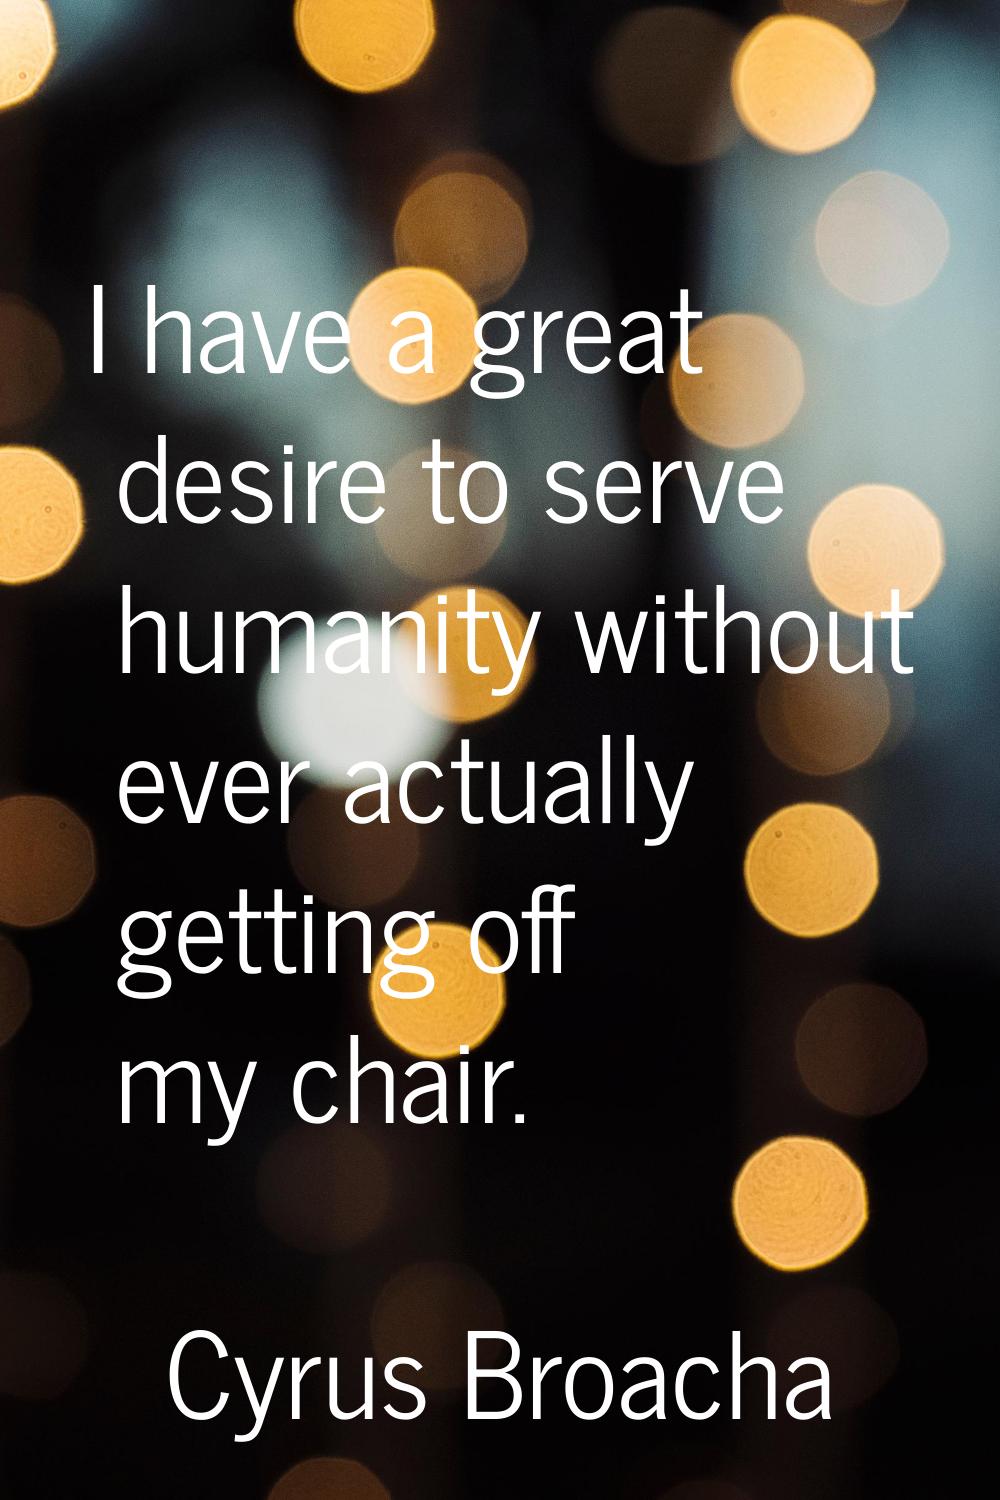 I have a great desire to serve humanity without ever actually getting off my chair.